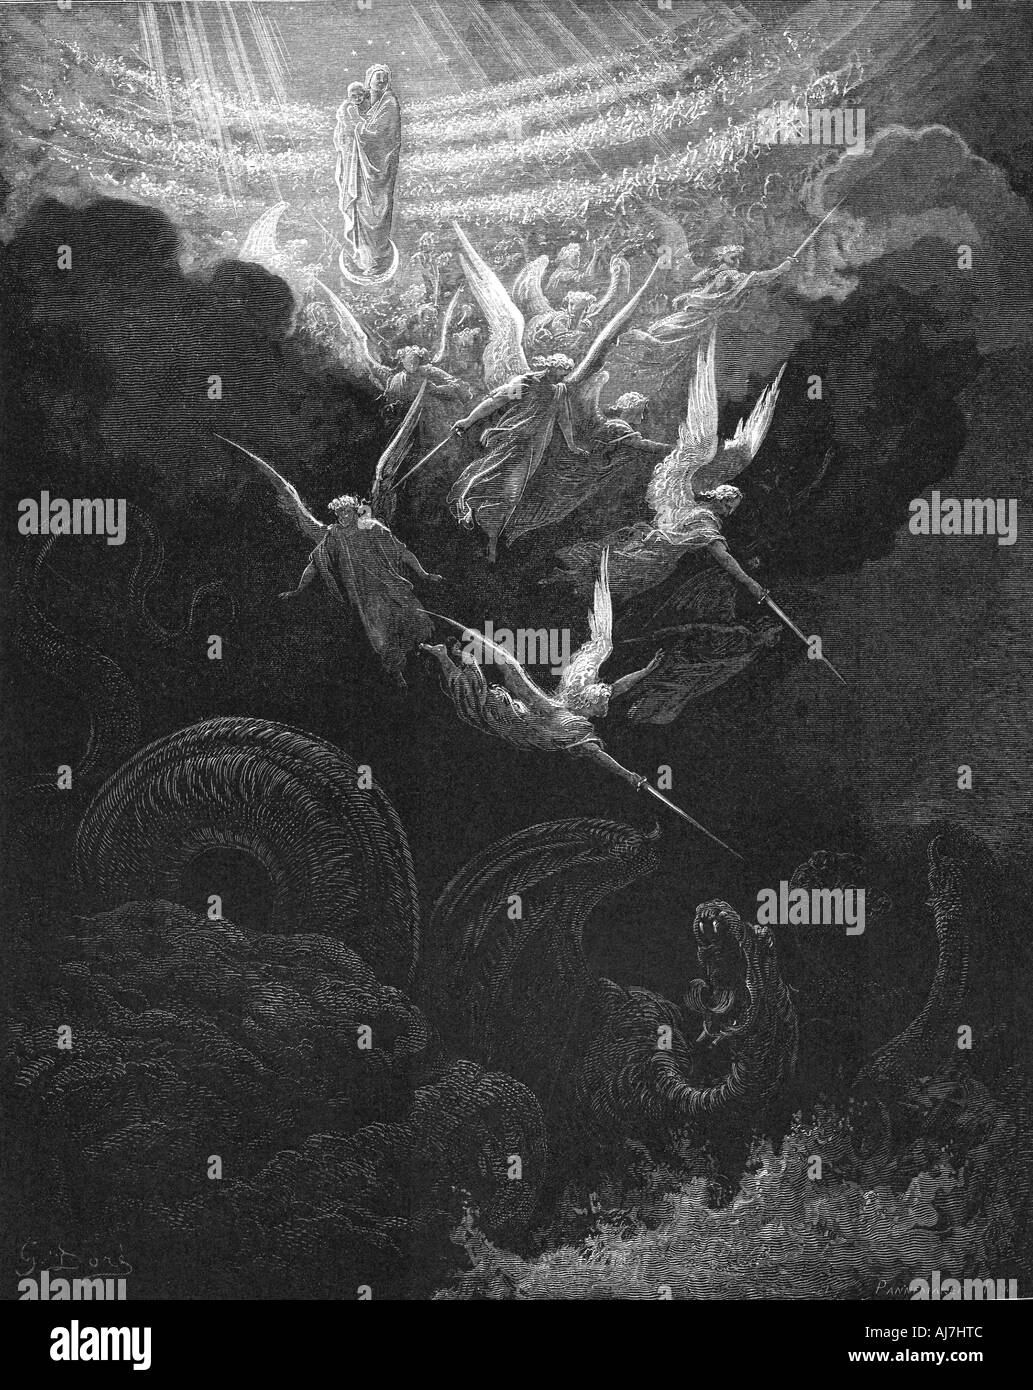 The Archangel Michael and his angels fighting the dragon, 1865-1866. Artist: Gustave Doré Stock Photo